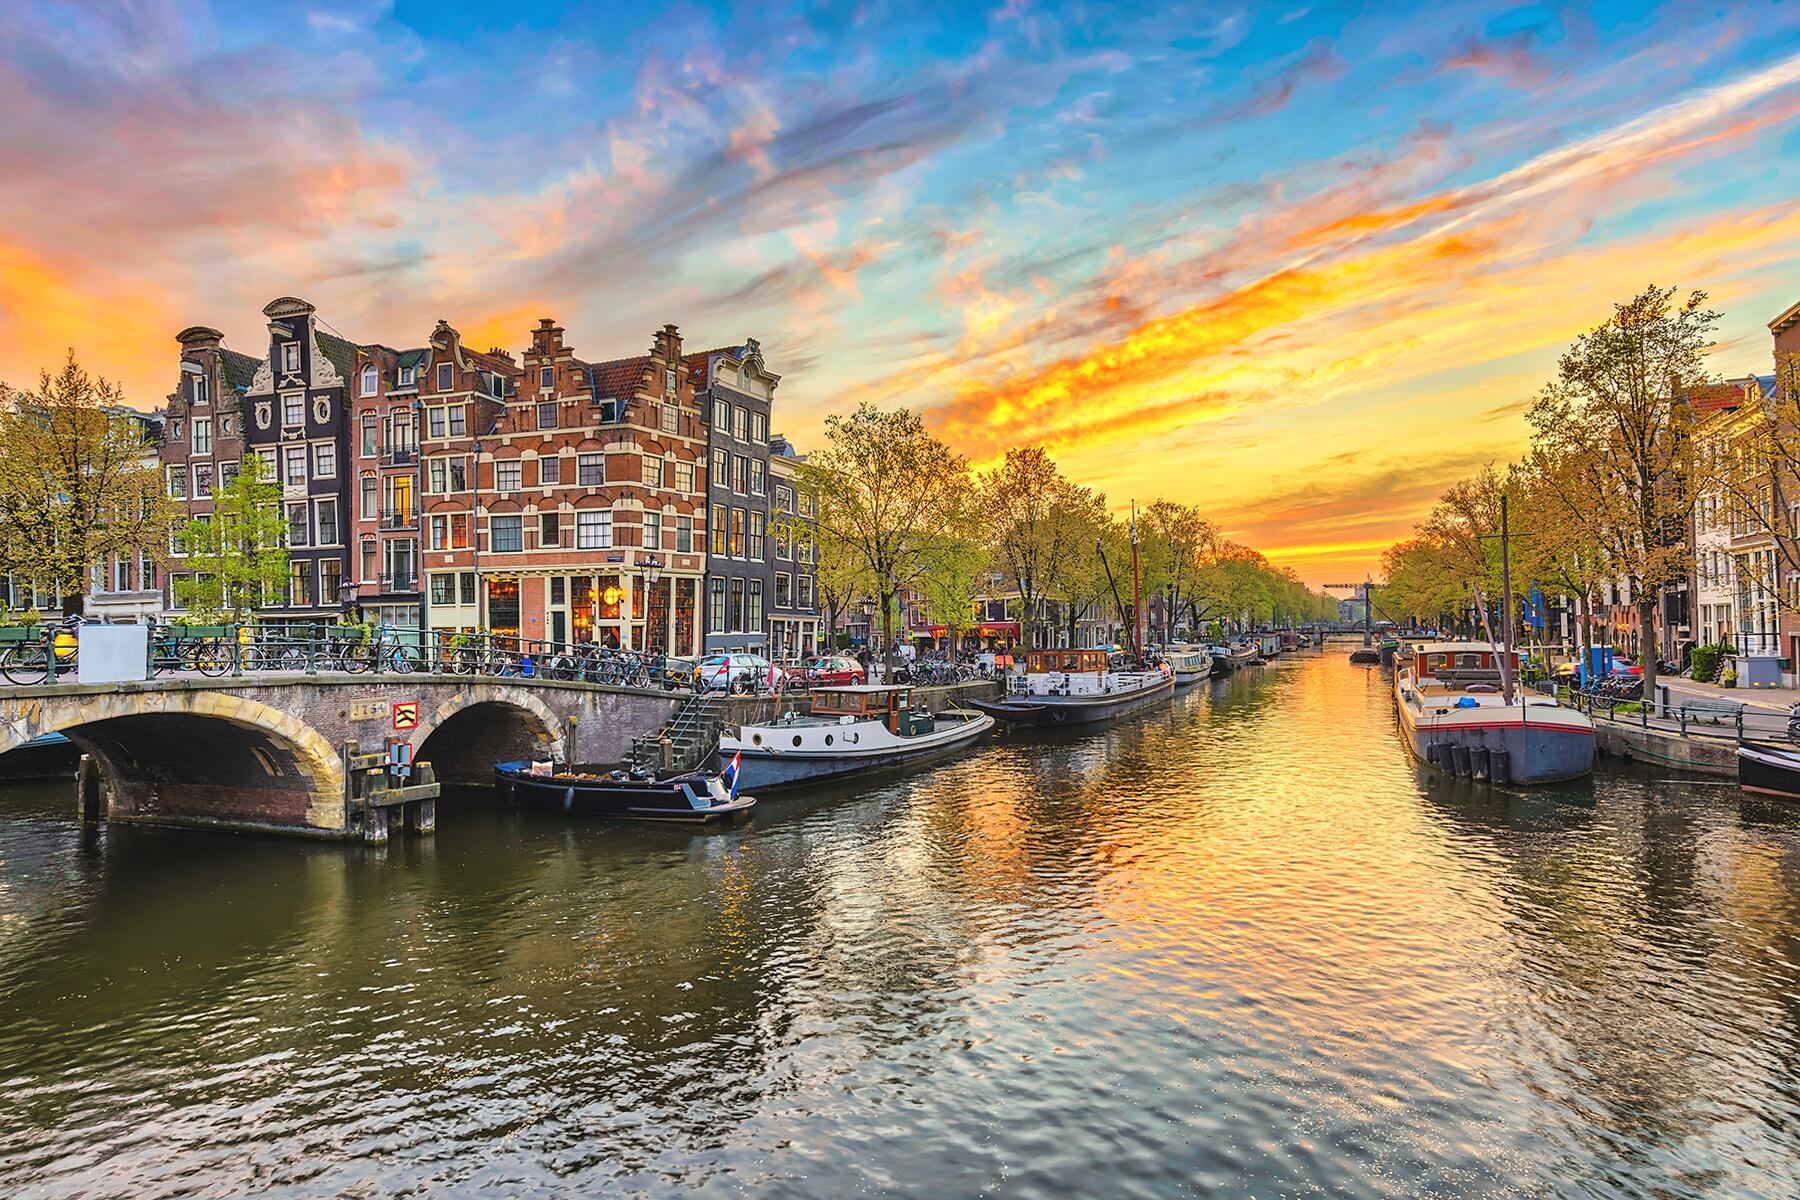 <a href='https://www.fodors.com/world/europe/netherlands/amsterdam/experiences/news/photos/everything-you-need-to-know-about-visiting-amsterdams-top-attractions#'>From &quot;Everything You Need to Know About Visiting Amsterdam’s Top Attractions&quot;</a>